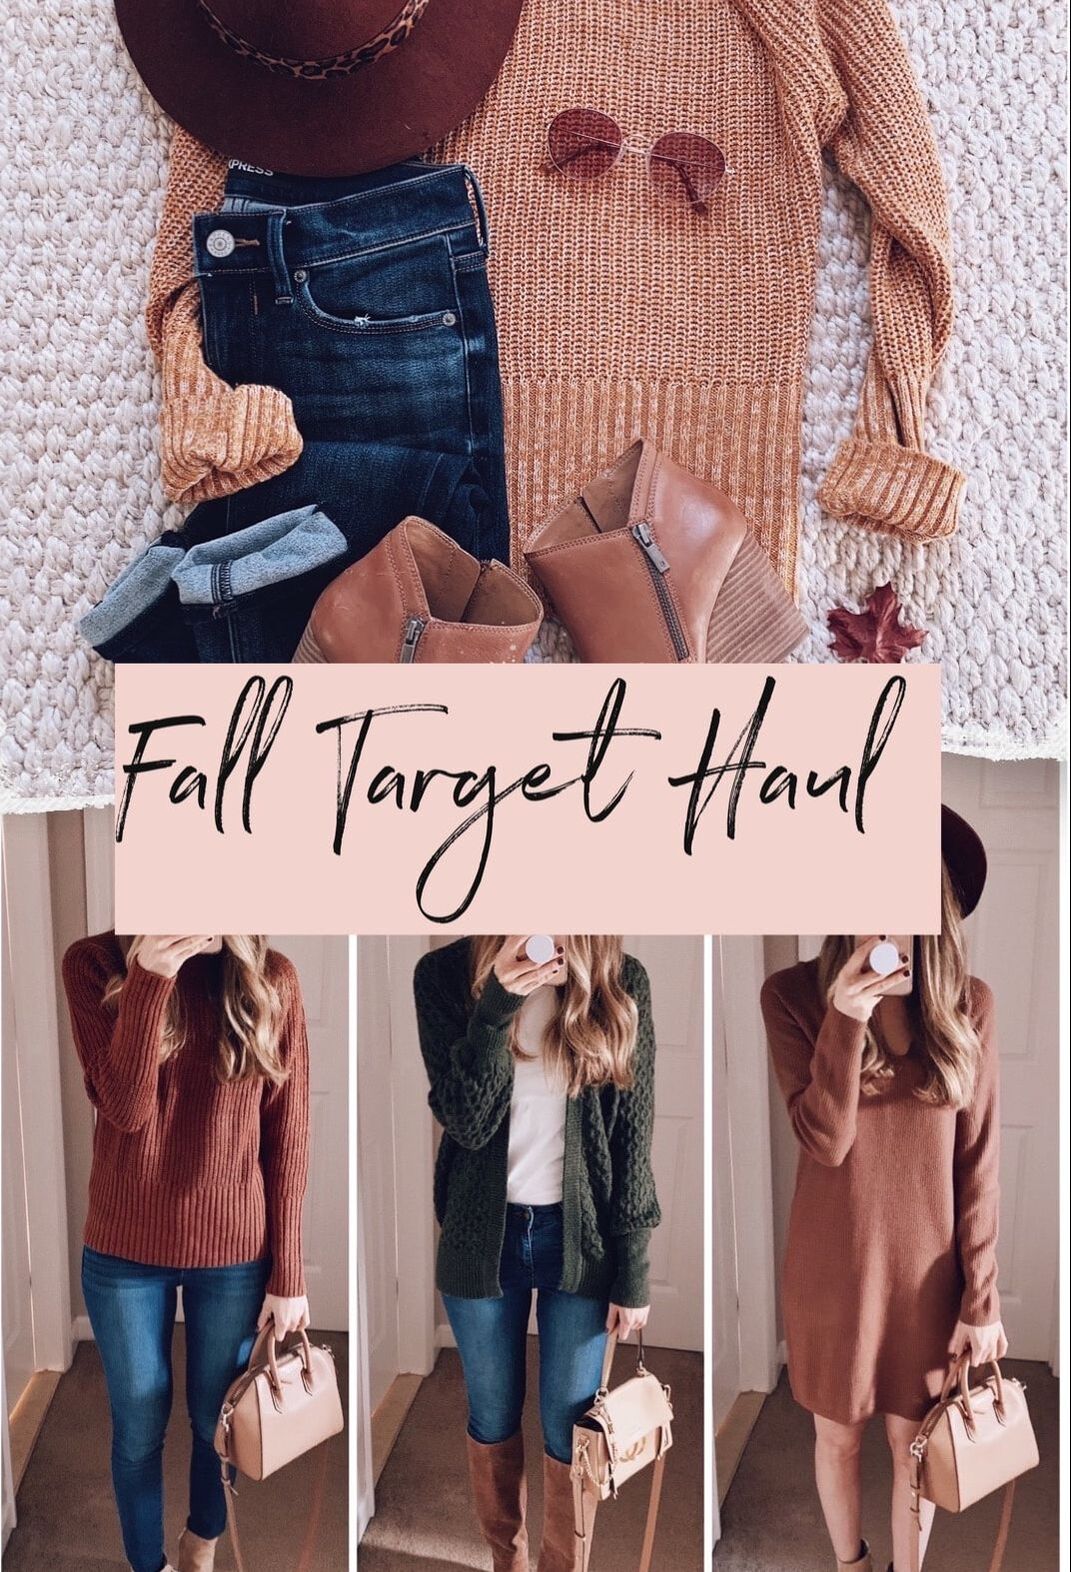 https://sunsetsandstilettos.com/wp-content/uploads/2019/11/fall-target-clothing-haul-outfit-affordable-outfit-ideas.jpg